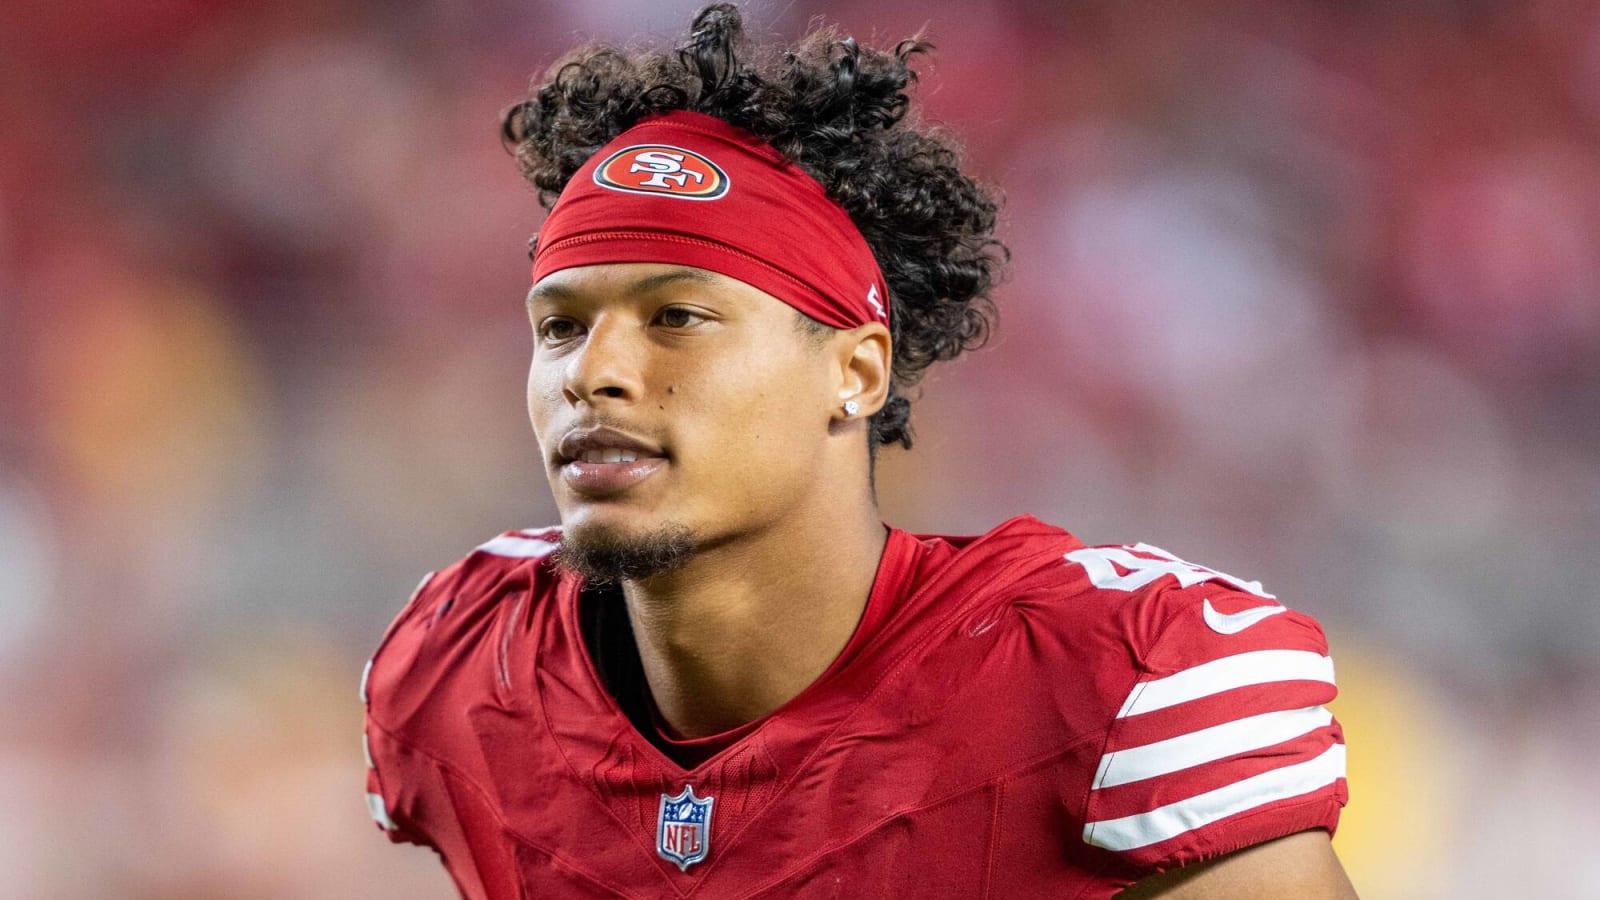 49ers waive safety Tayler Hawkins from IR list